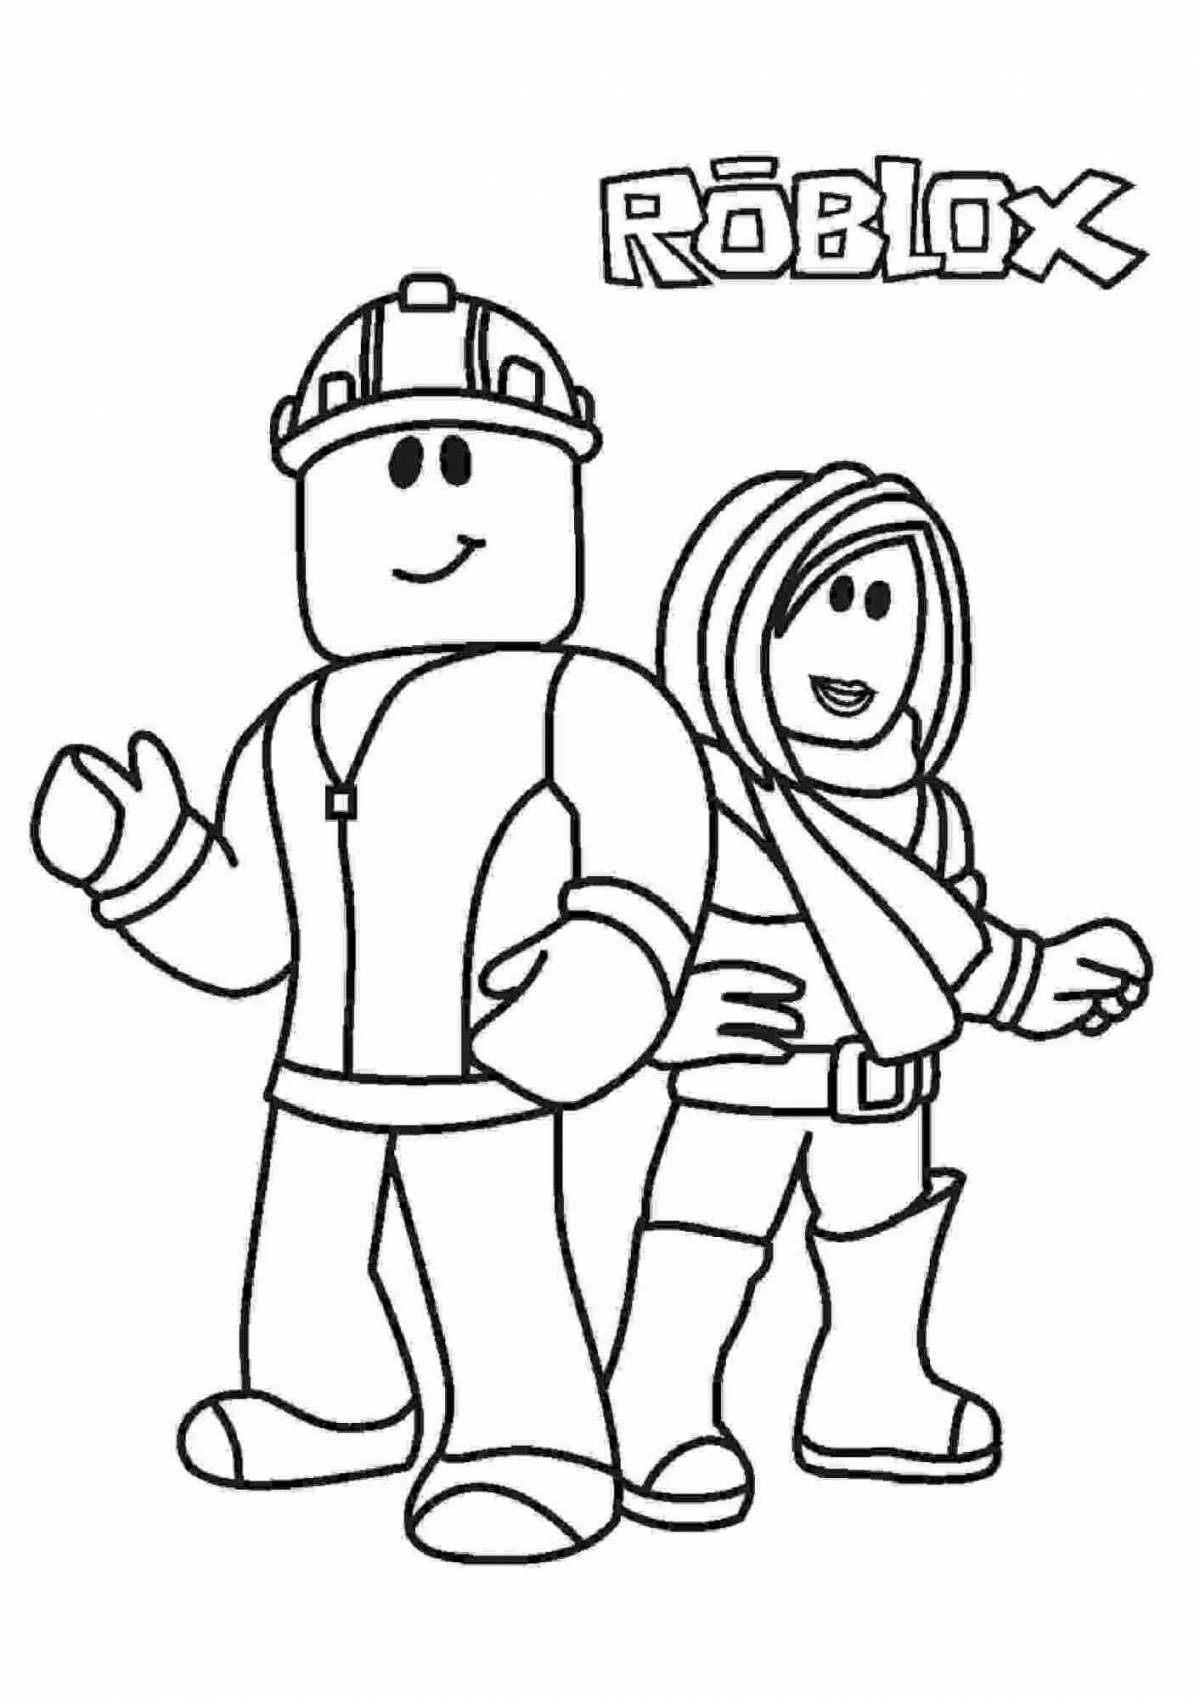 Roblox serene queen coloring page